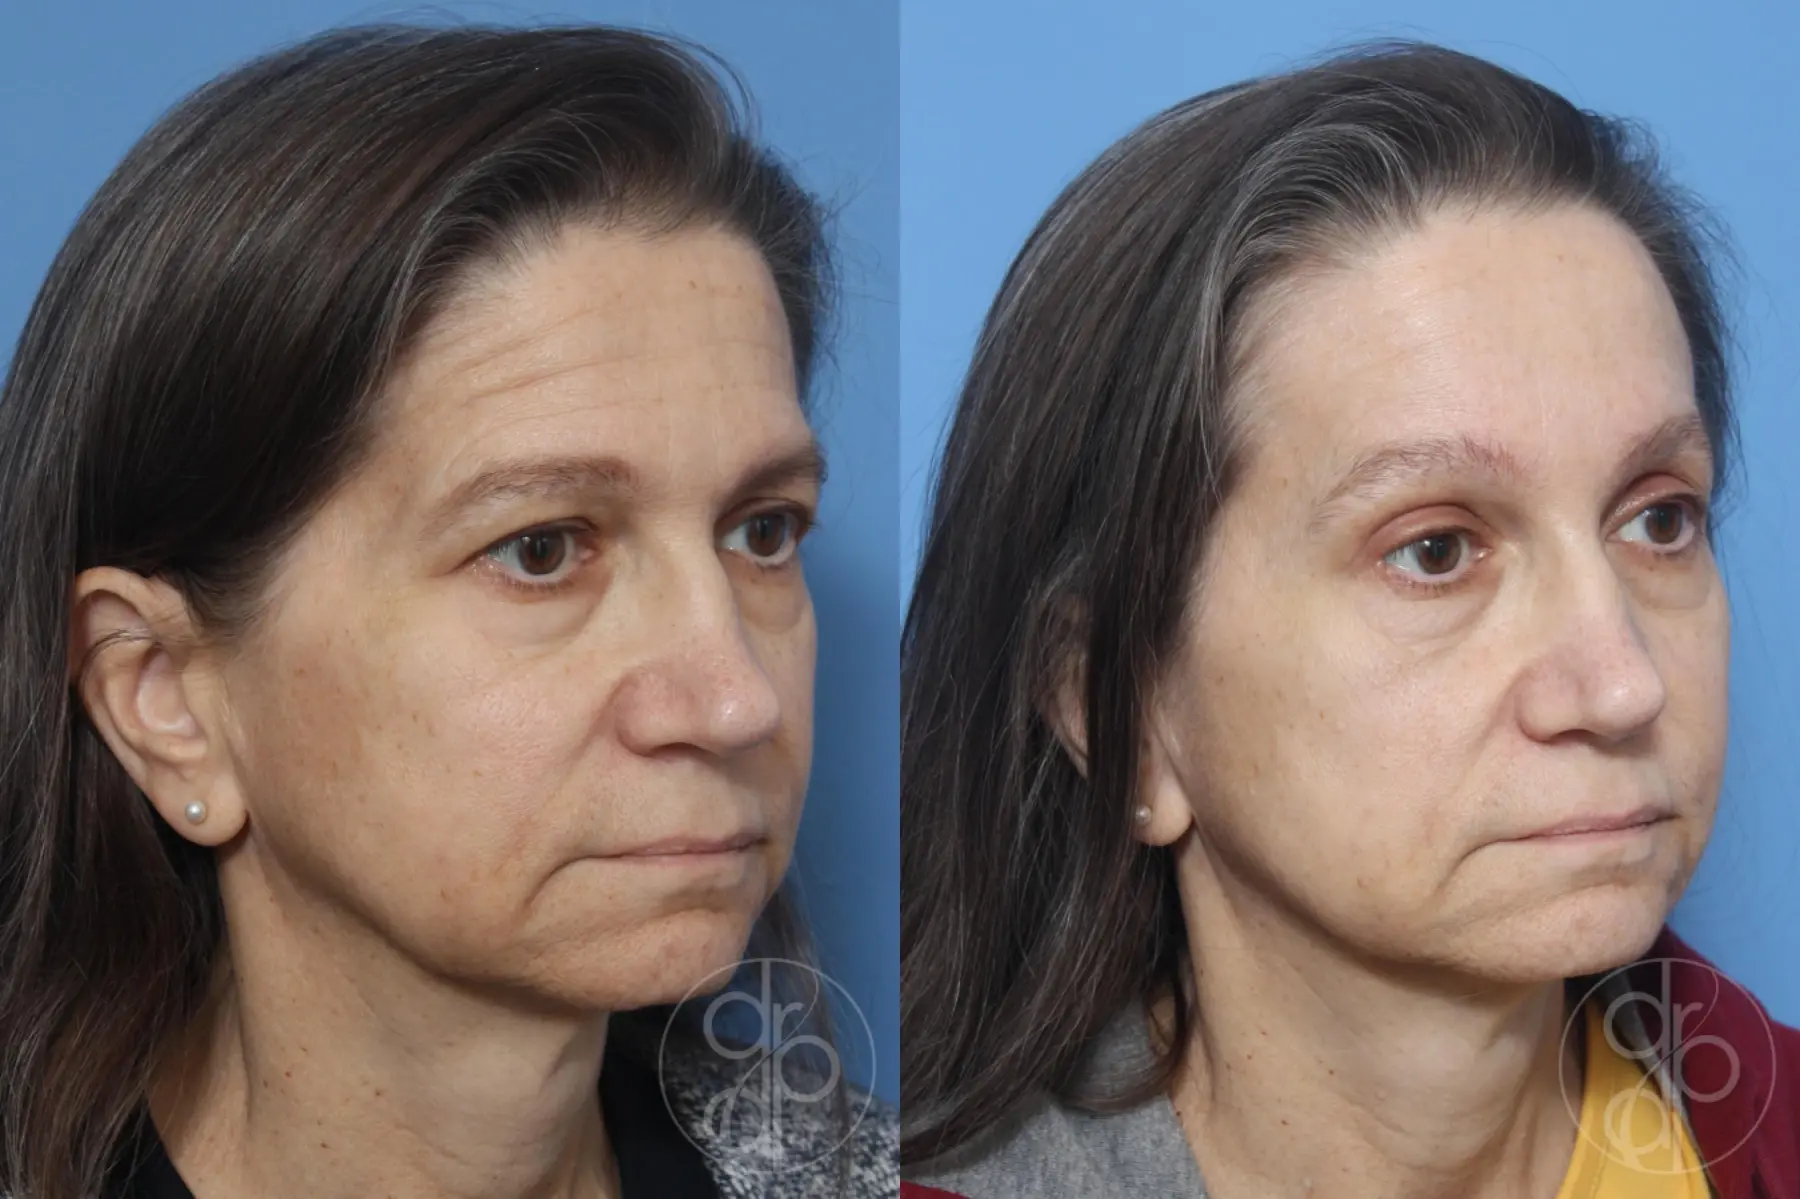 patient 12880 blepharoplasty before and after result - Before and After 2